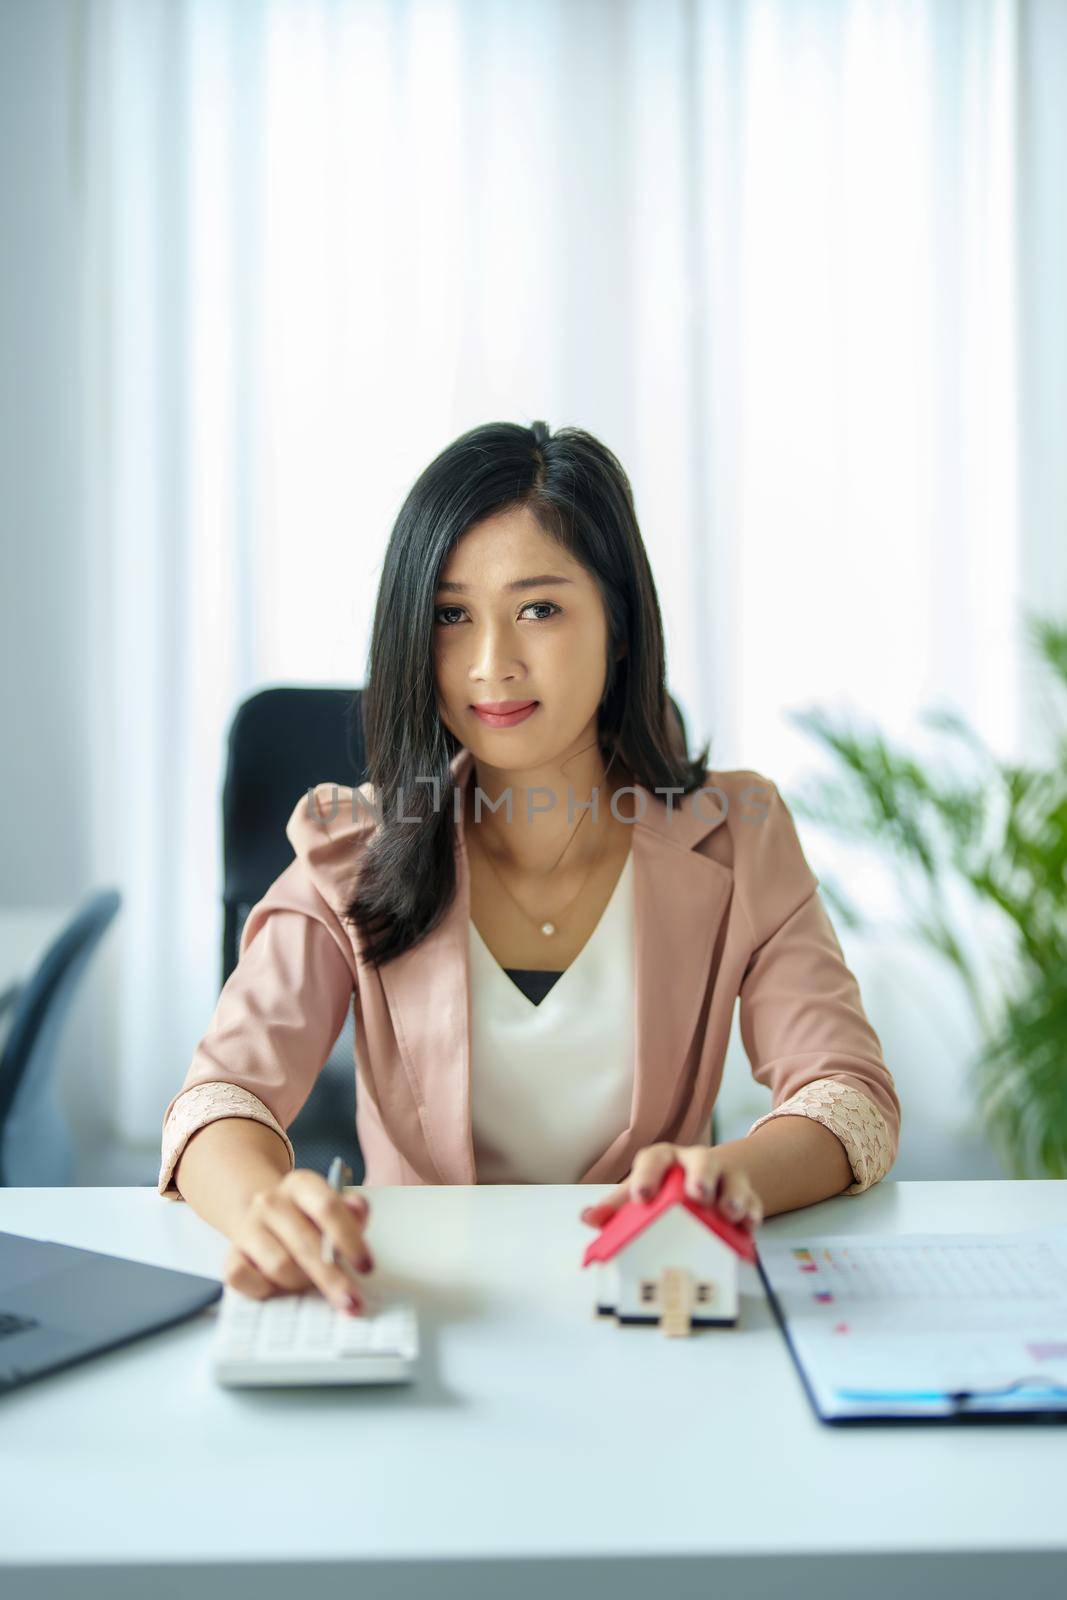 Entrepreneurs, business owners, accountants, real estate agents, Portrait of asian woman uses a calculator to calculate her home budget to assess the risks of investing in real estate. by Manastrong